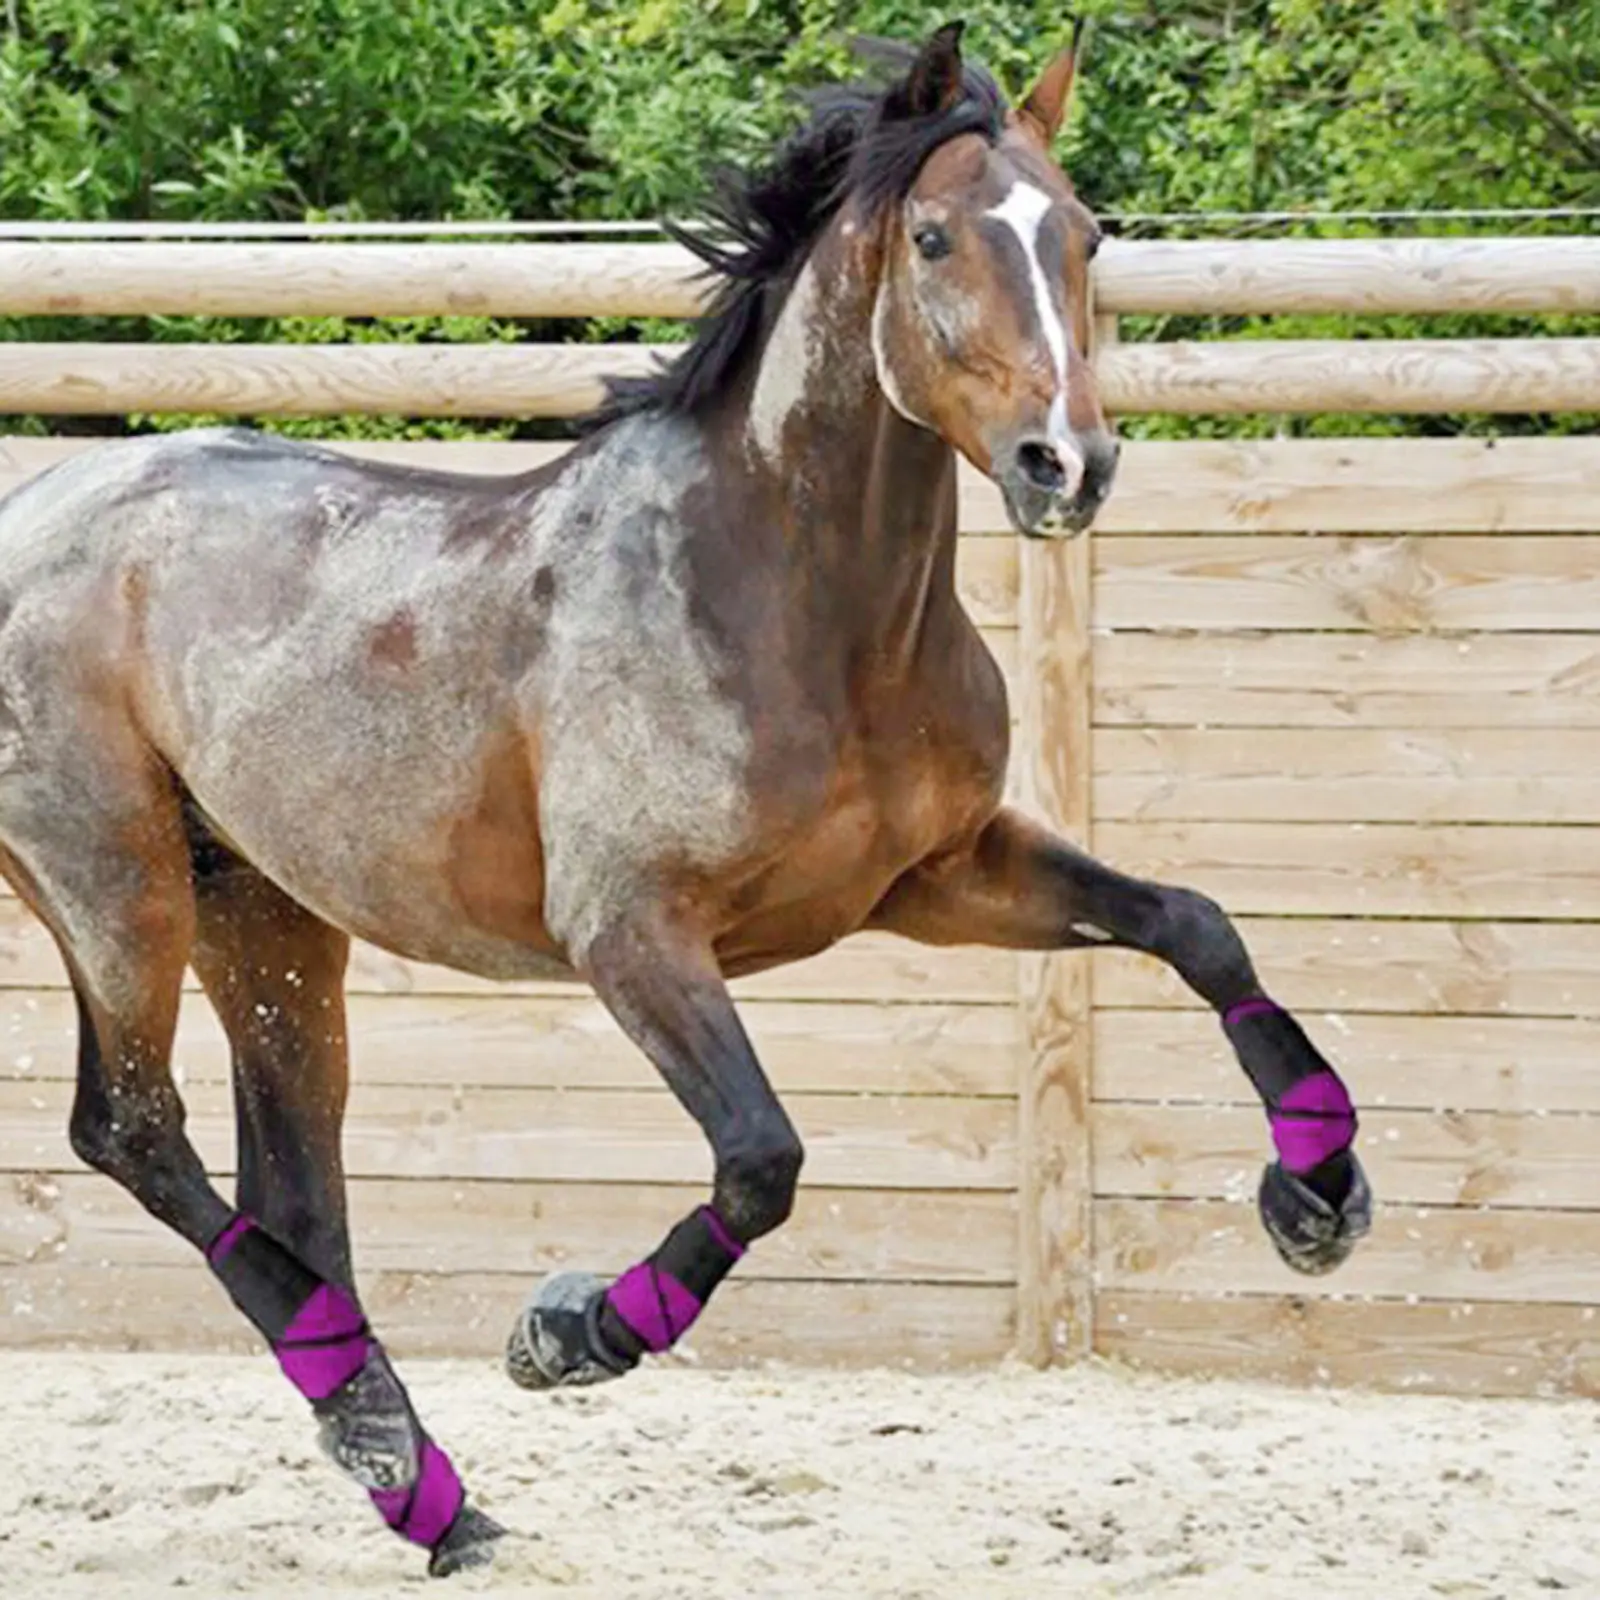 Horse Tendon Boots Equestrain Front Rear Leg Protect Support Brushing Boot Equine Dressage Boots for Training Jumping Riding